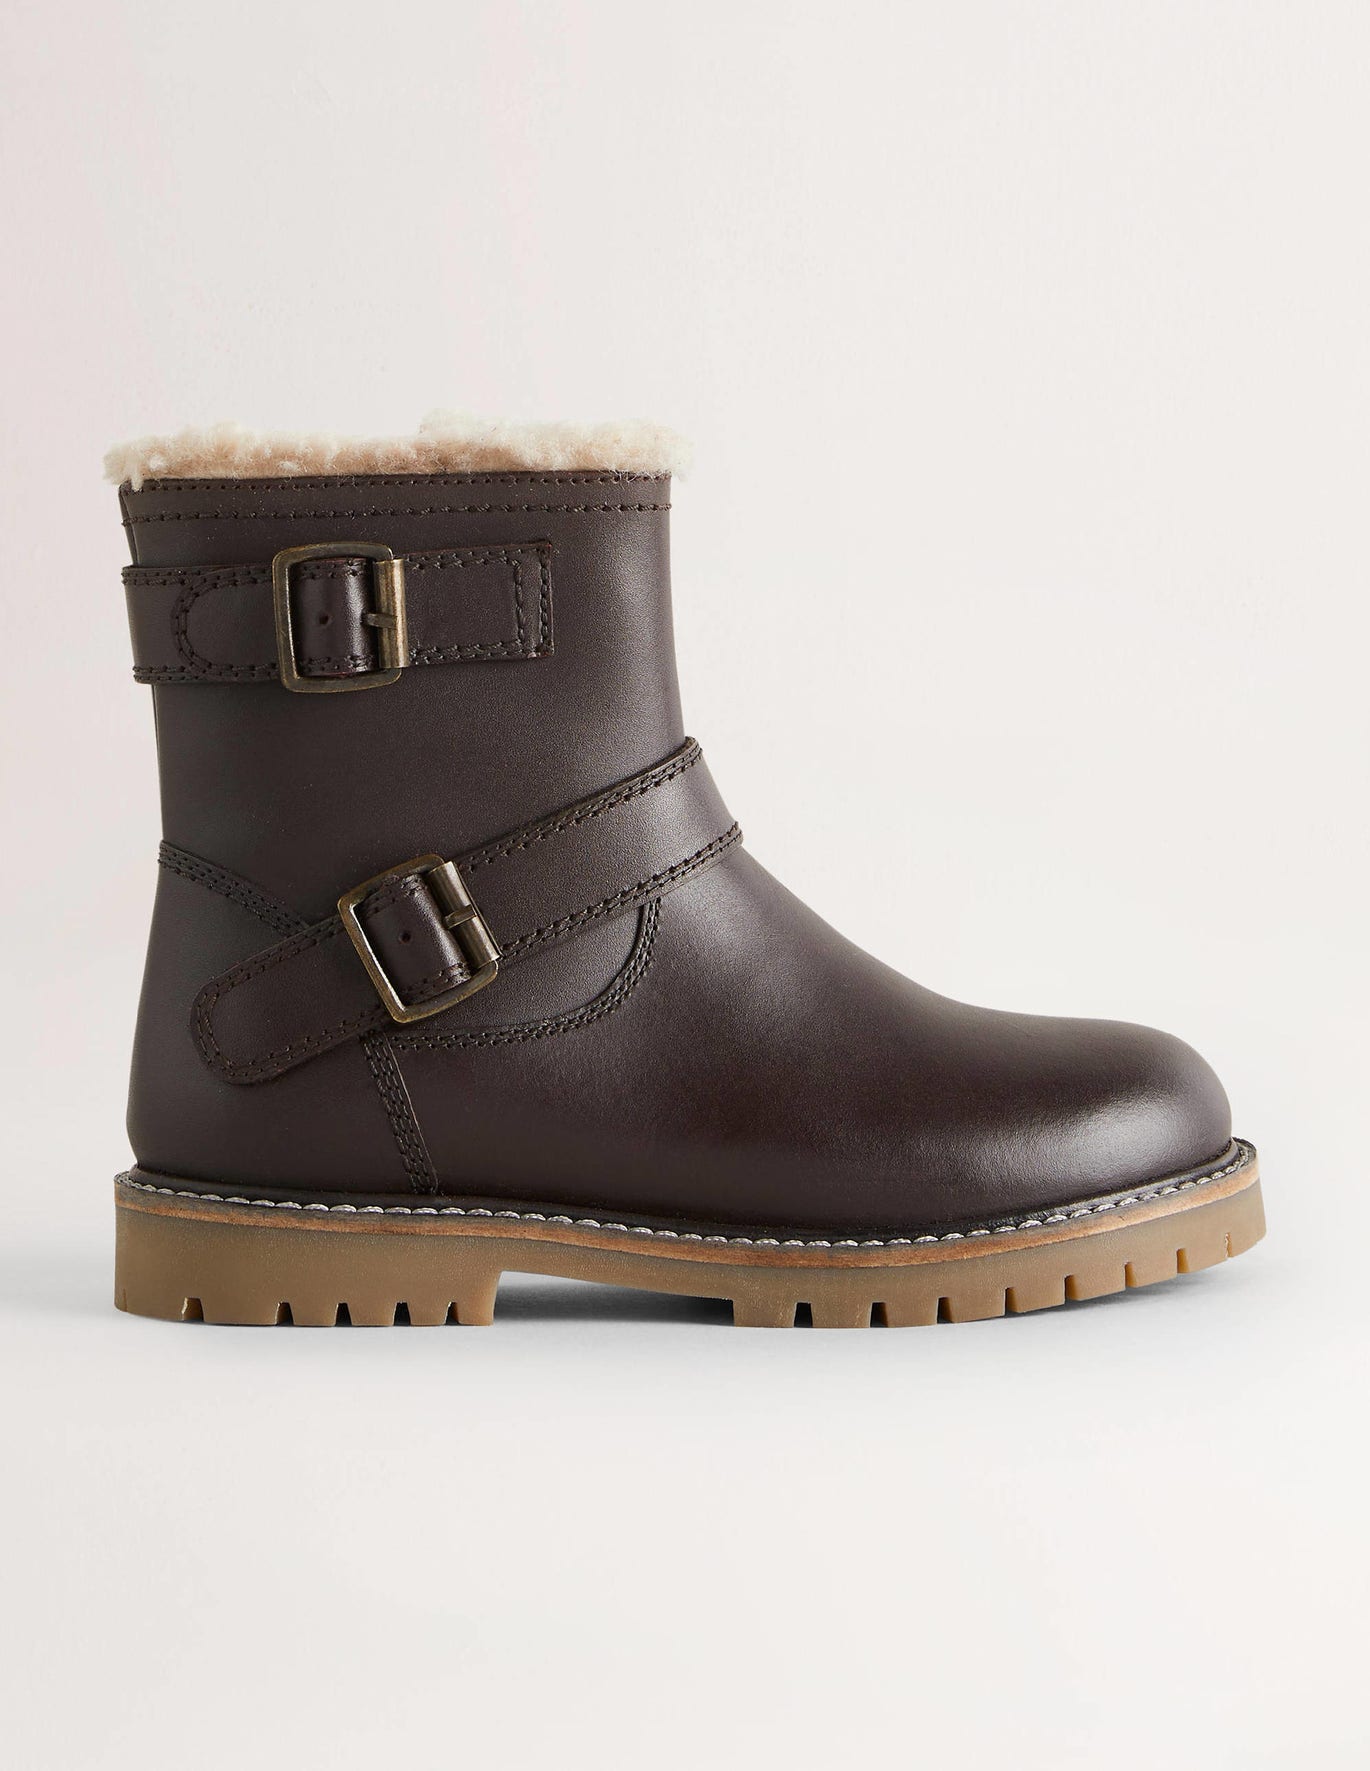 Boden Leather Biker Boots - Chocolate